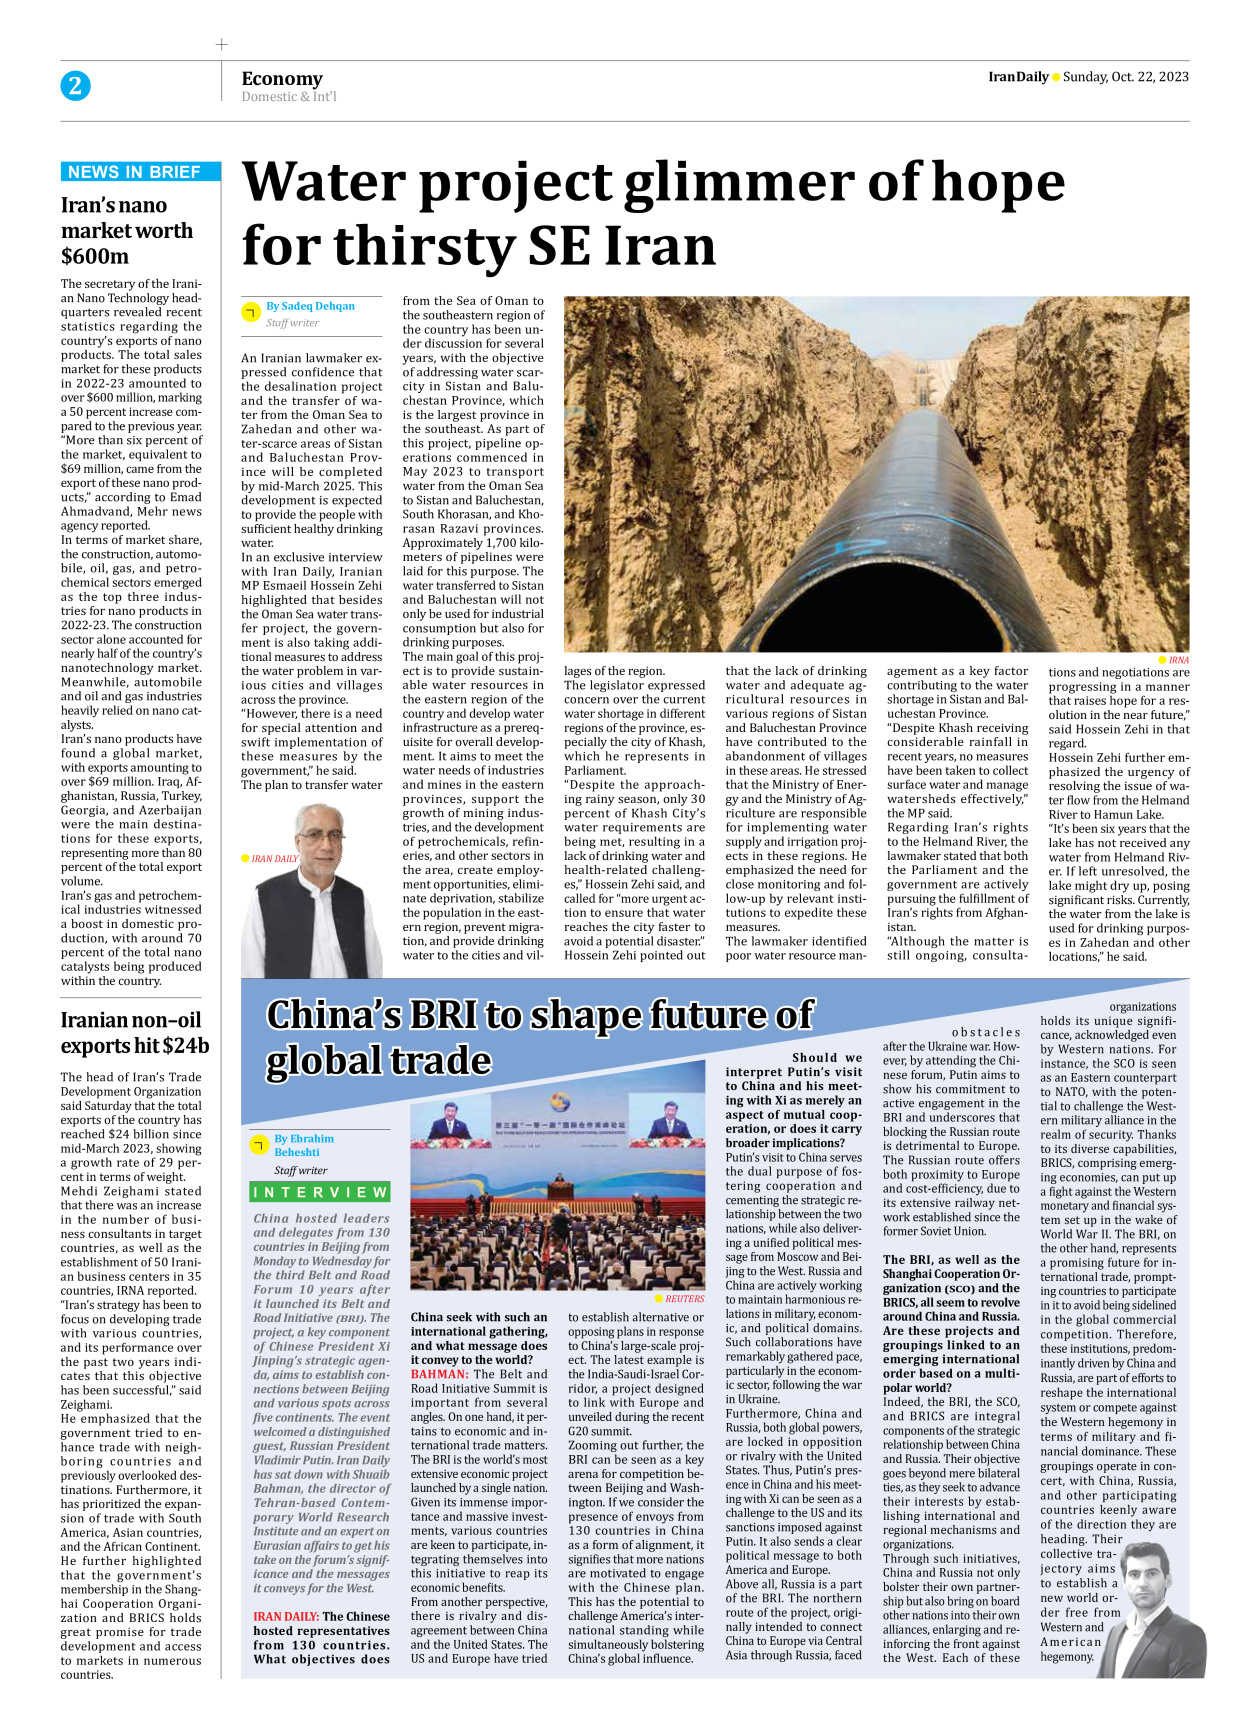 Iran Daily - Number Seven Thousand Four Hundred and Fourteen - 22 October 2023 - Page 2